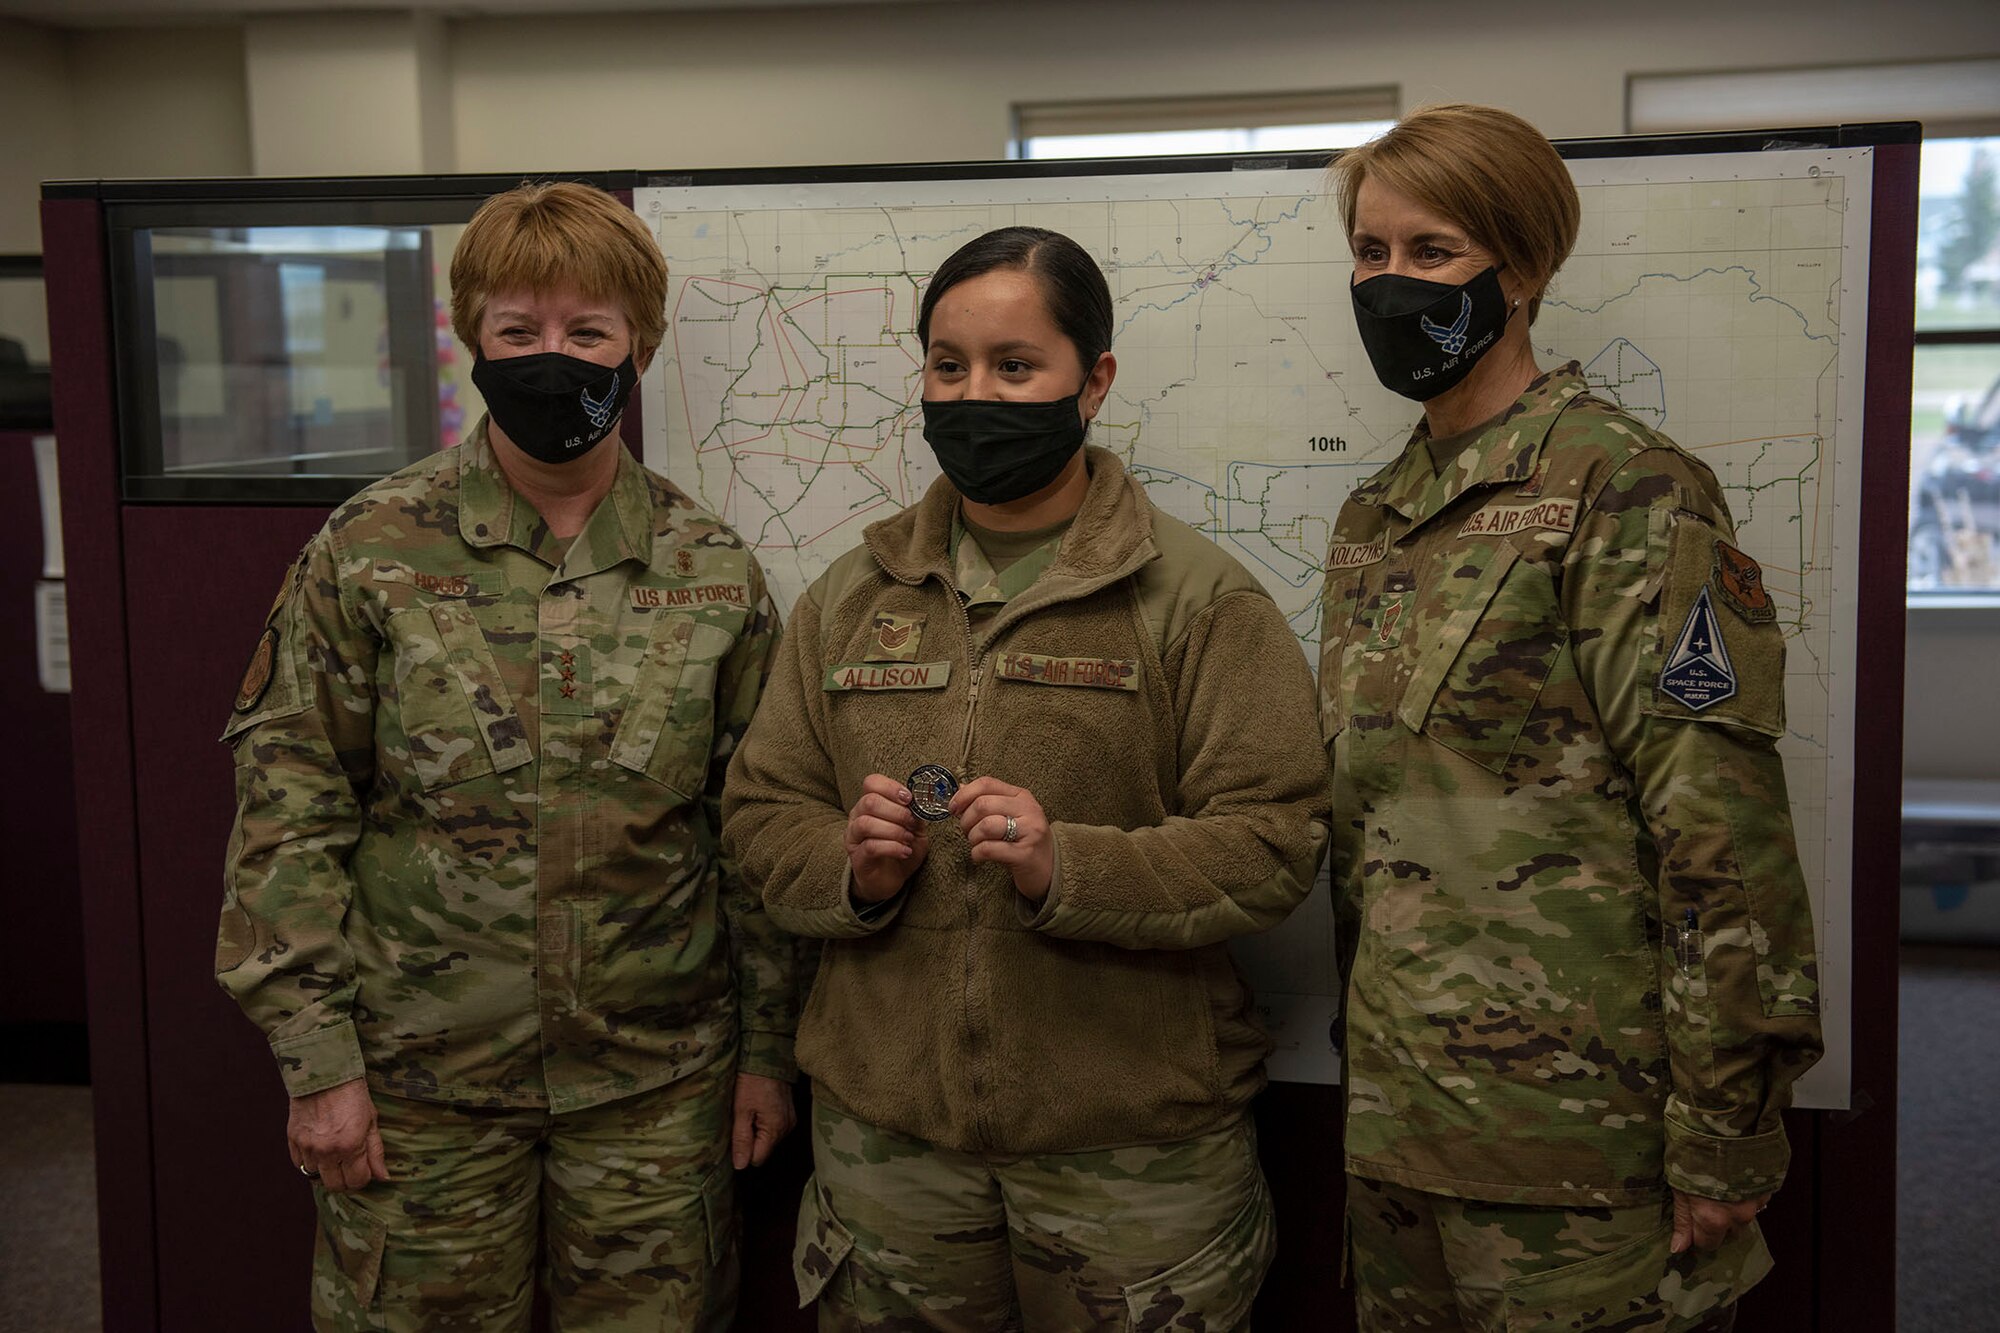 Lt. General Dorothy Hogg, U.S. Air Force surgeon general and Chief Master Sgt. Dawn Kolczynski, medical enlisted force and enlisted corps chief, pose for a photo with Tech Sgt. Alejandra Allison, 341st Medical Group public health supervisor, after Allison received a coin for exceptional performance April 29, 2021 at Malmstrom Air Force Base, Mont.